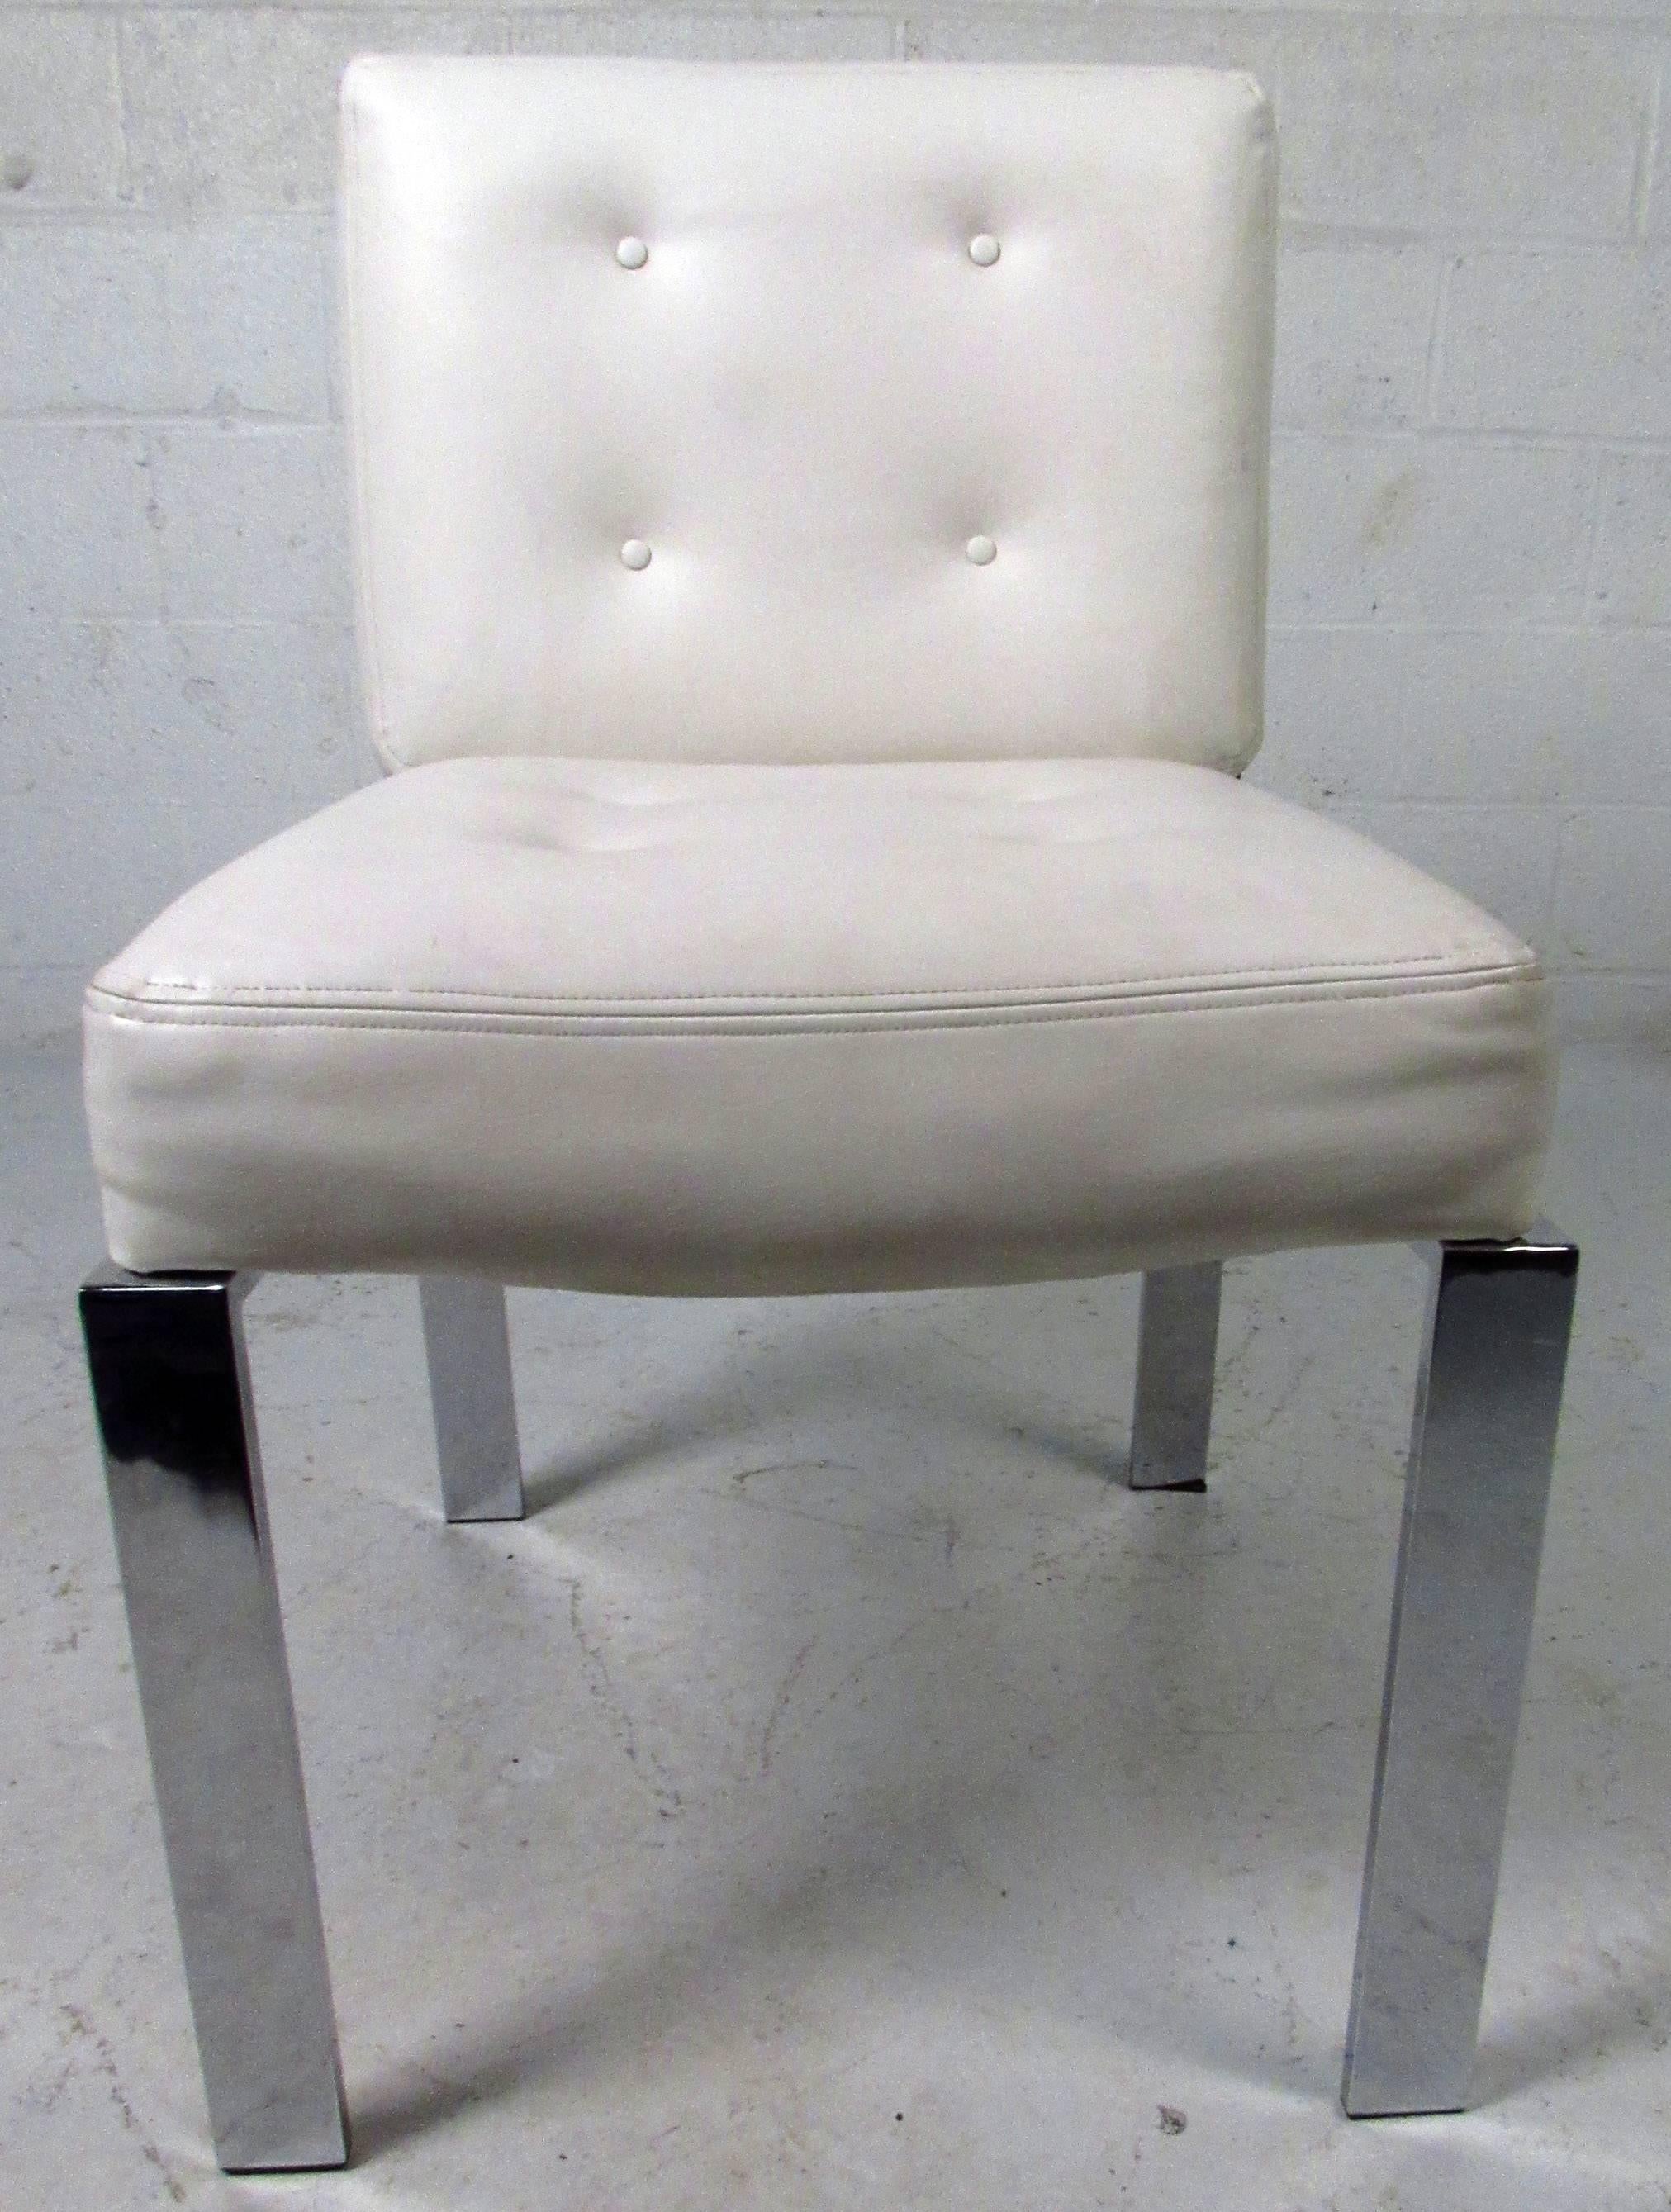 Vintage-modern dining chairs designed by Milo Baughman, features tufted white vinyl upholstery and sculpted chrome frame and legs.

Please confirm item location NY or NJ with dealer.